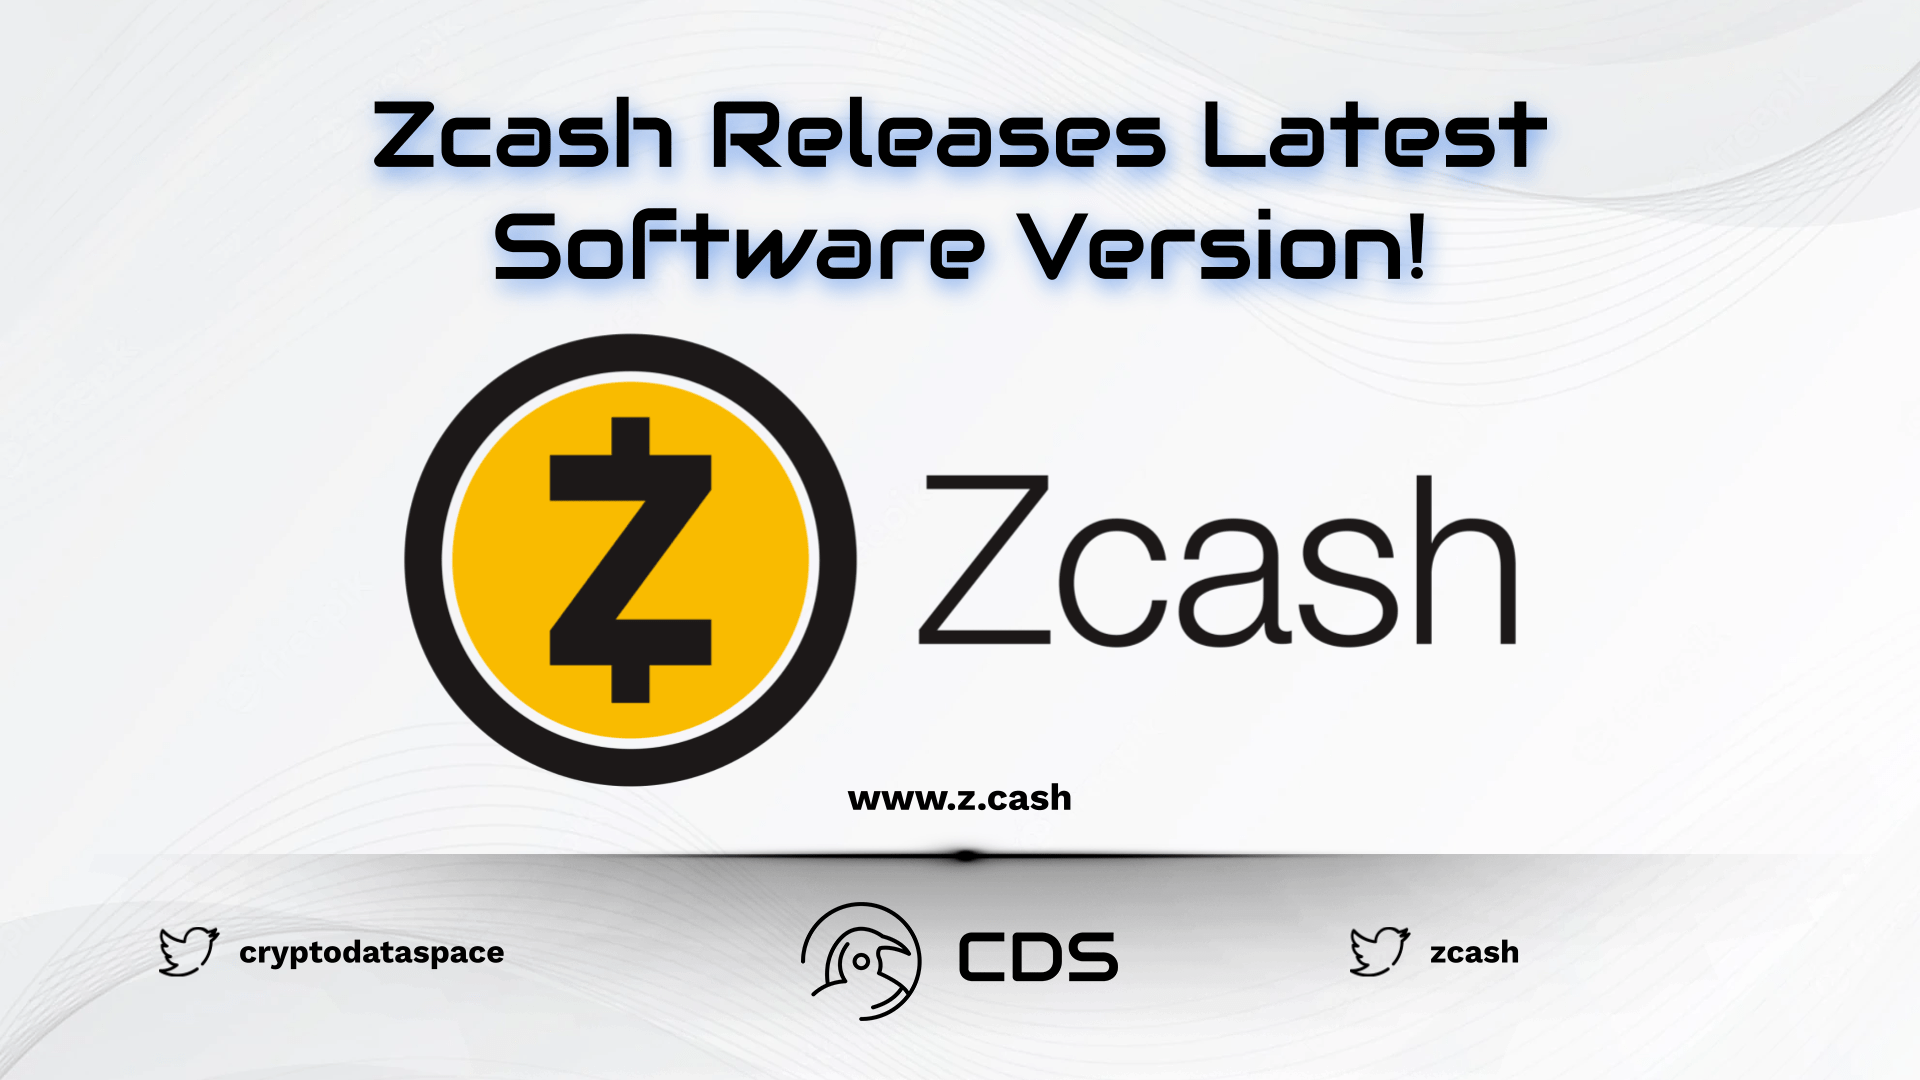 Zcash Releases Latest Software Version!